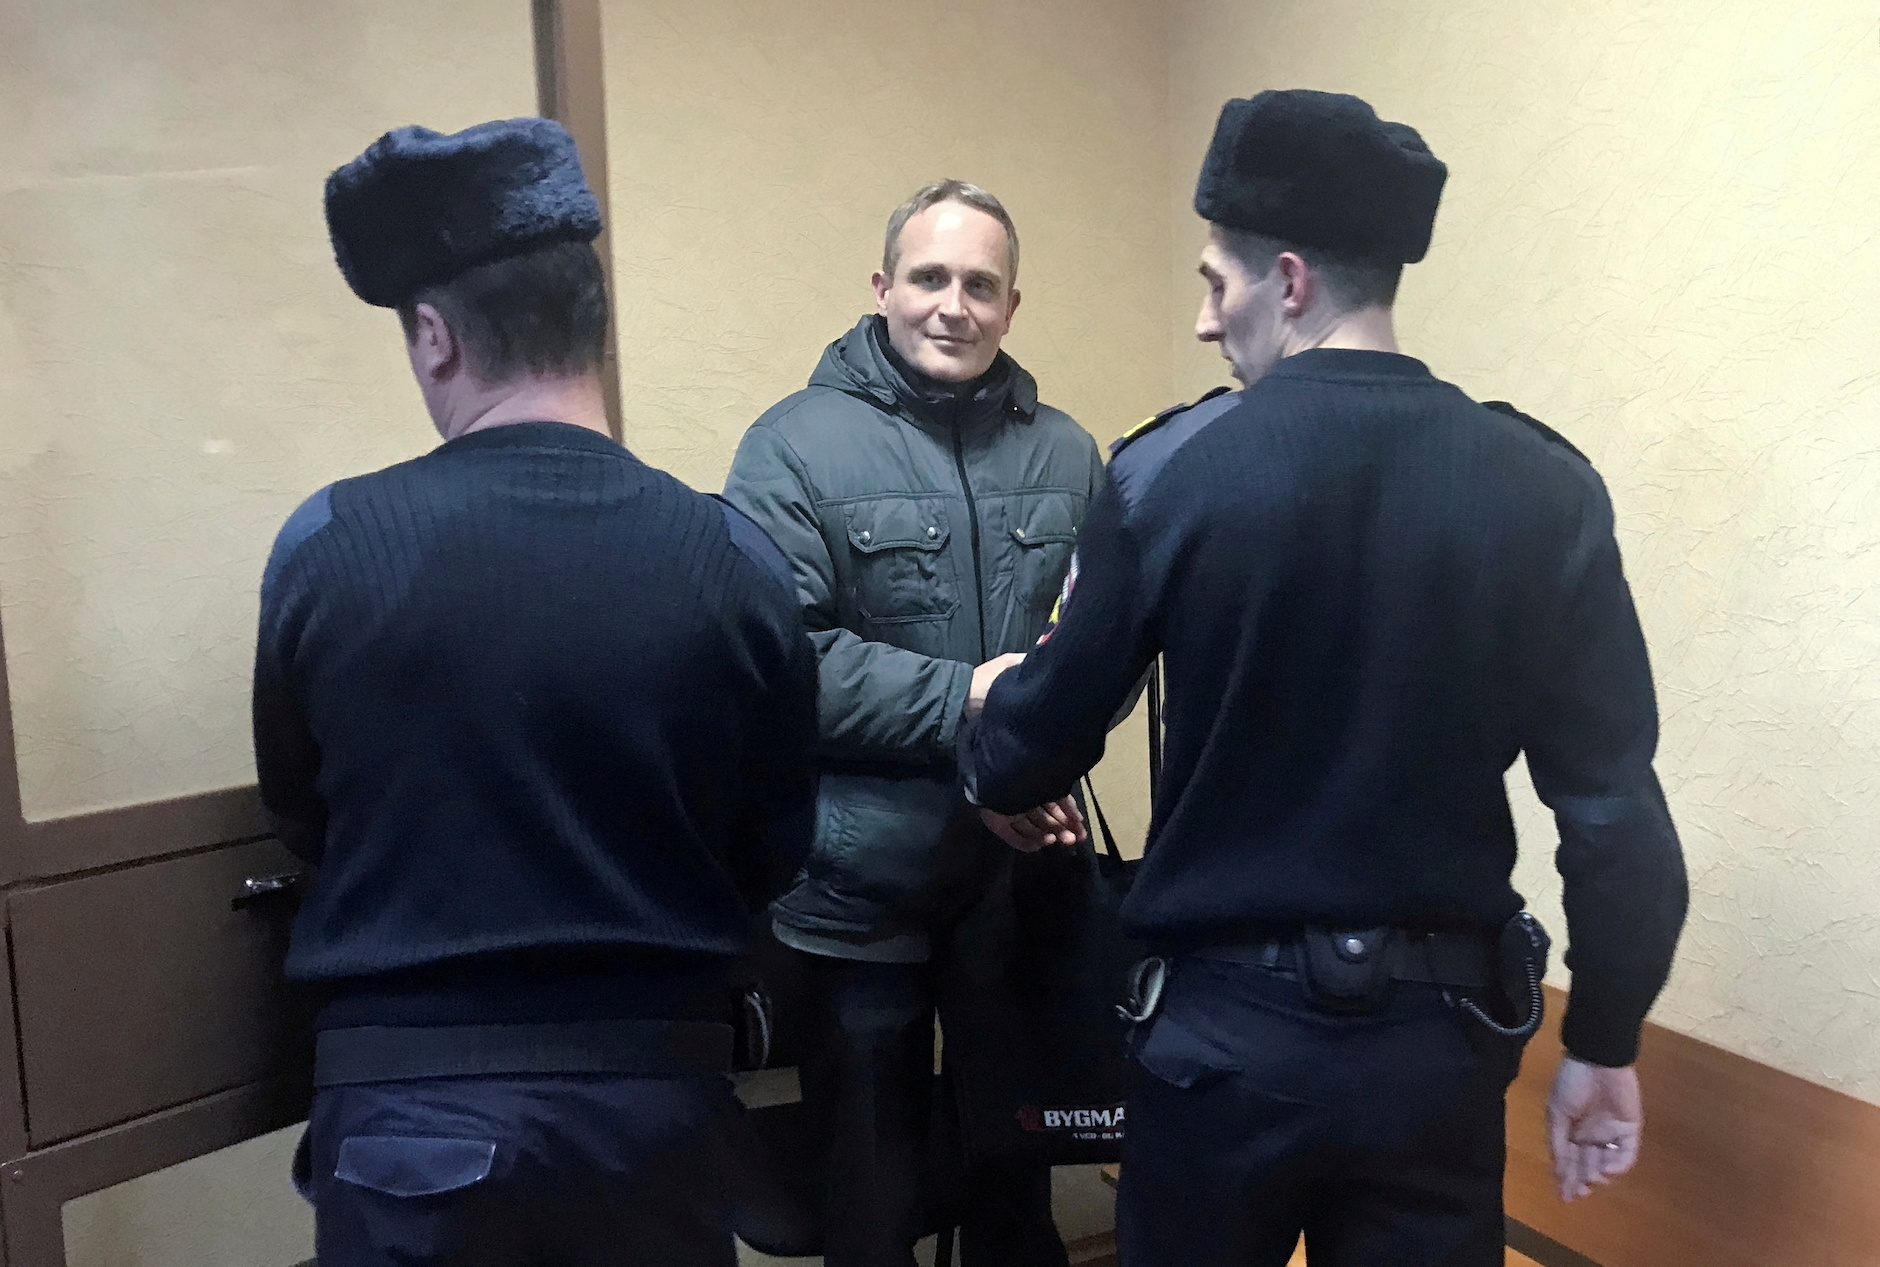 Russia releases Jehovah’s Witness follower from prison